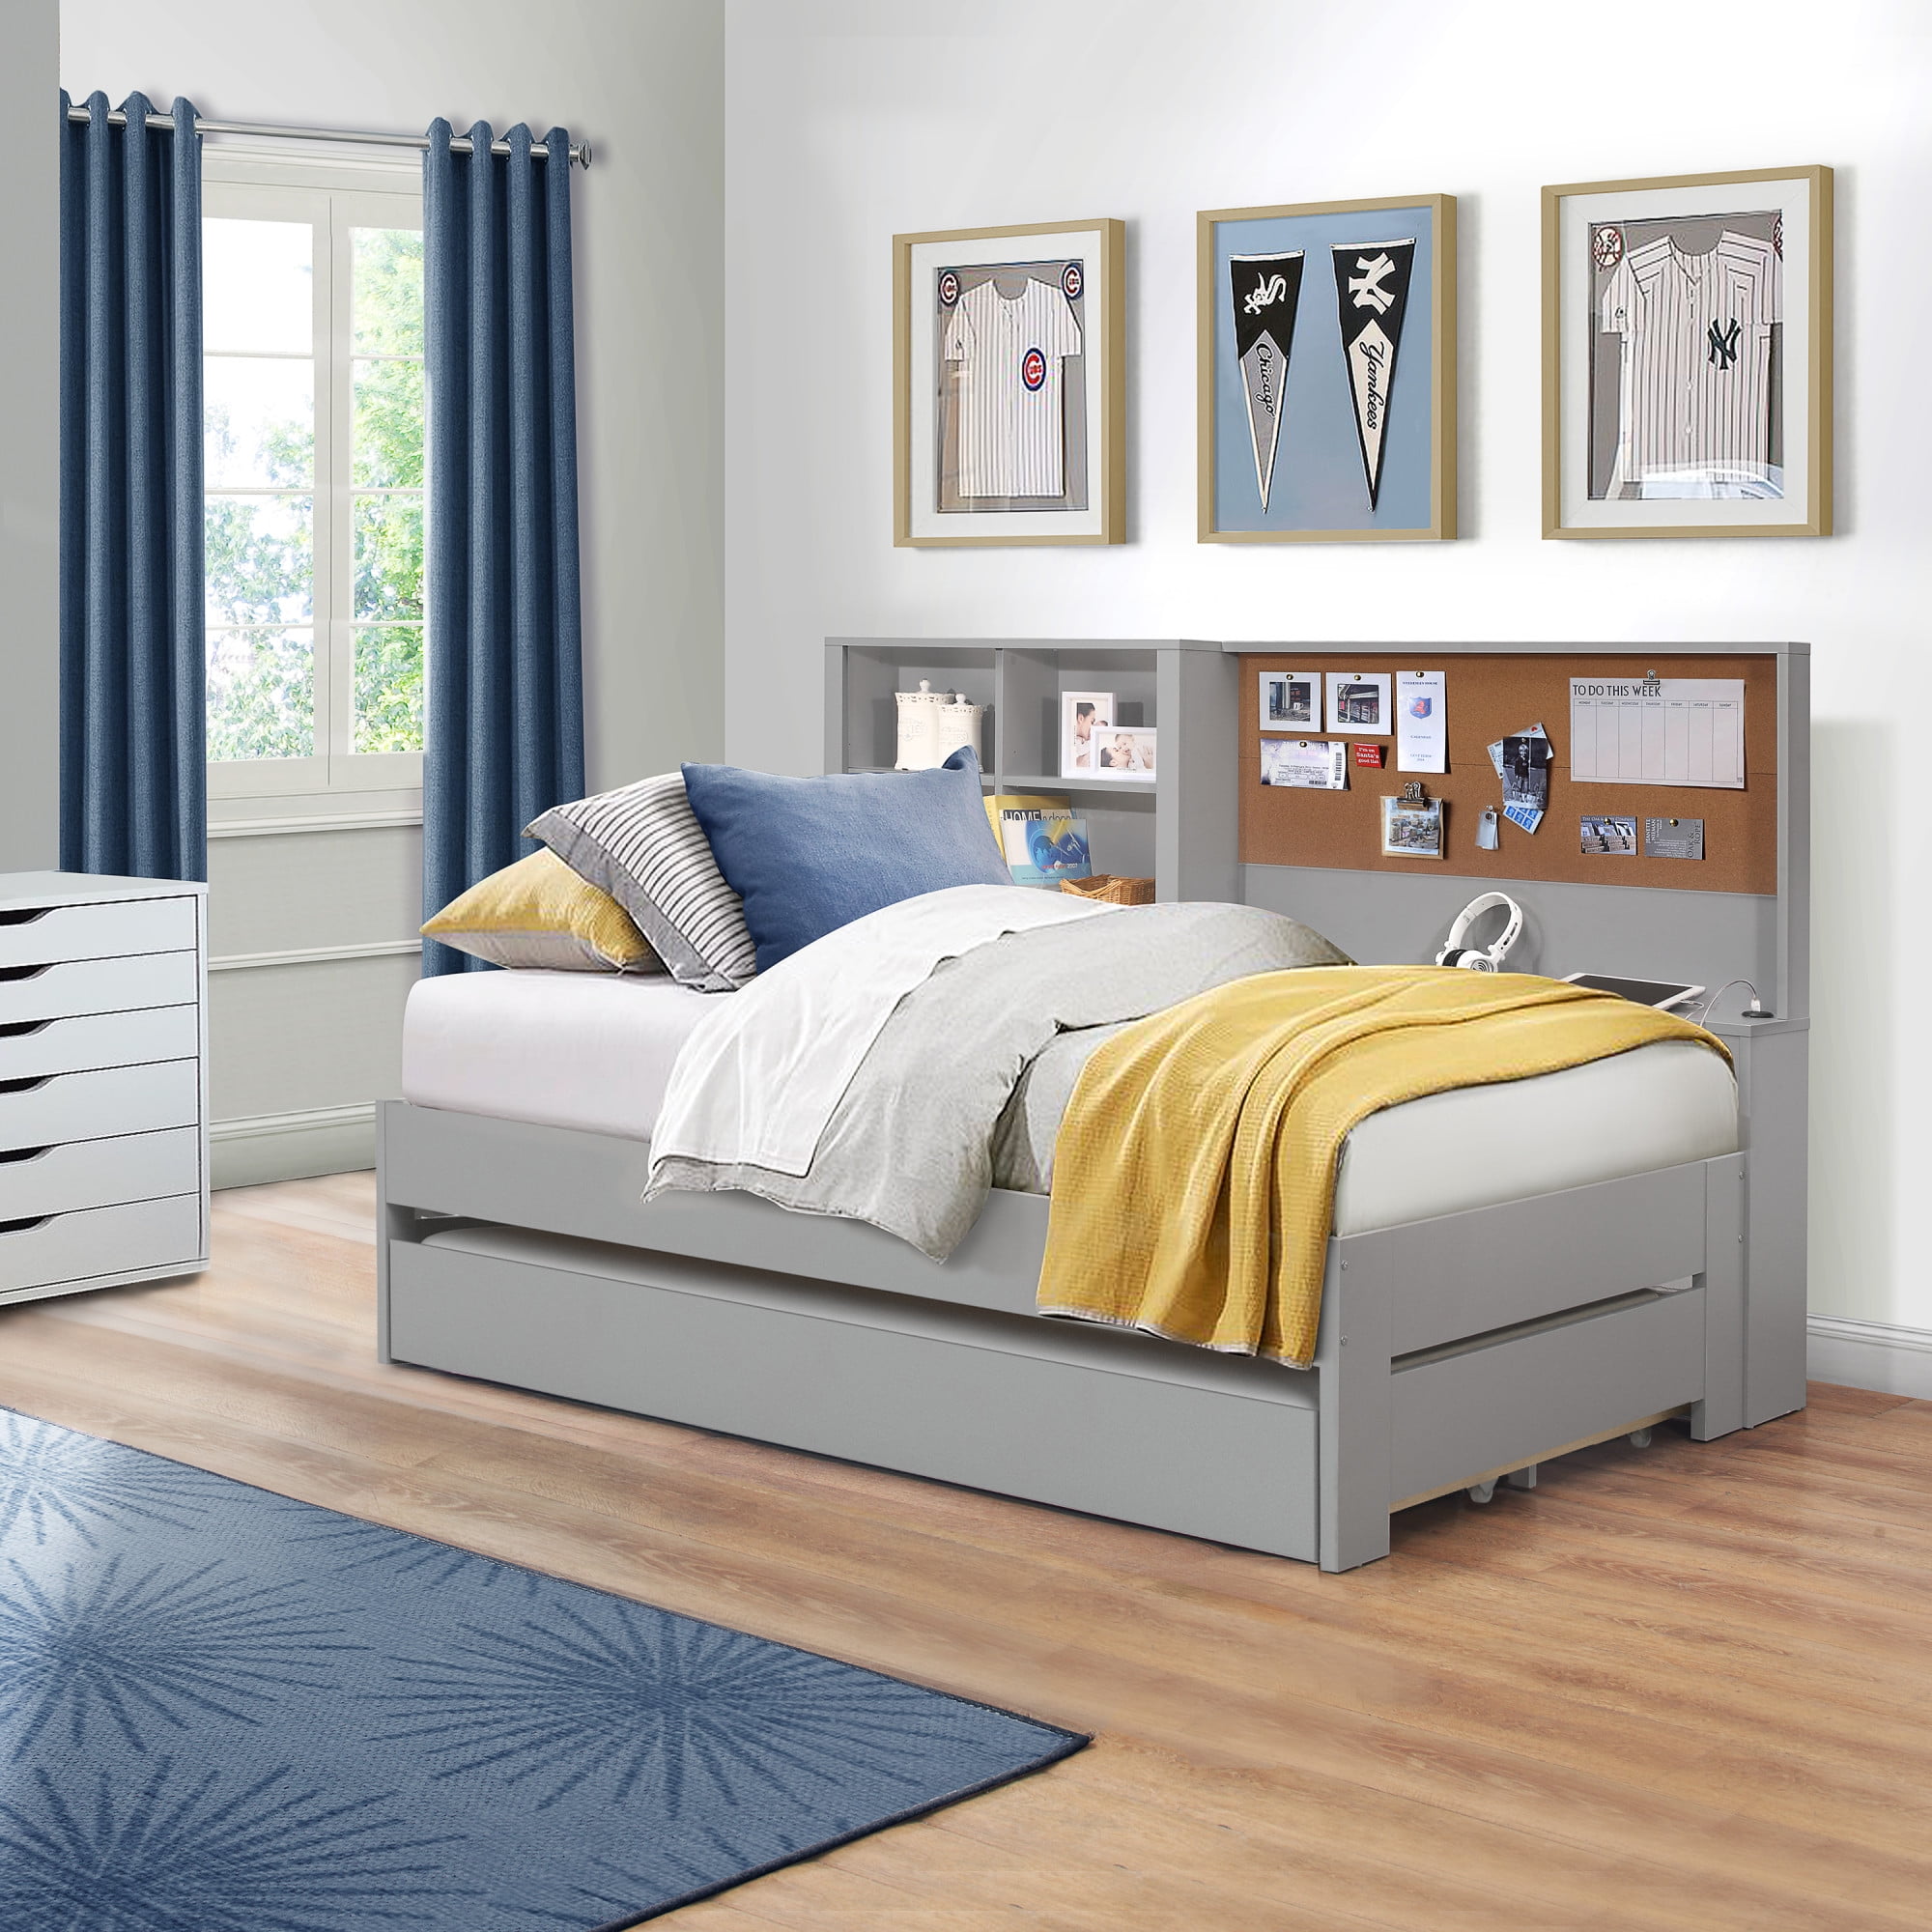 Breslin Bookcase Twin Bed With Trundle, Twin Trundle Bed With Bookcase Headboard